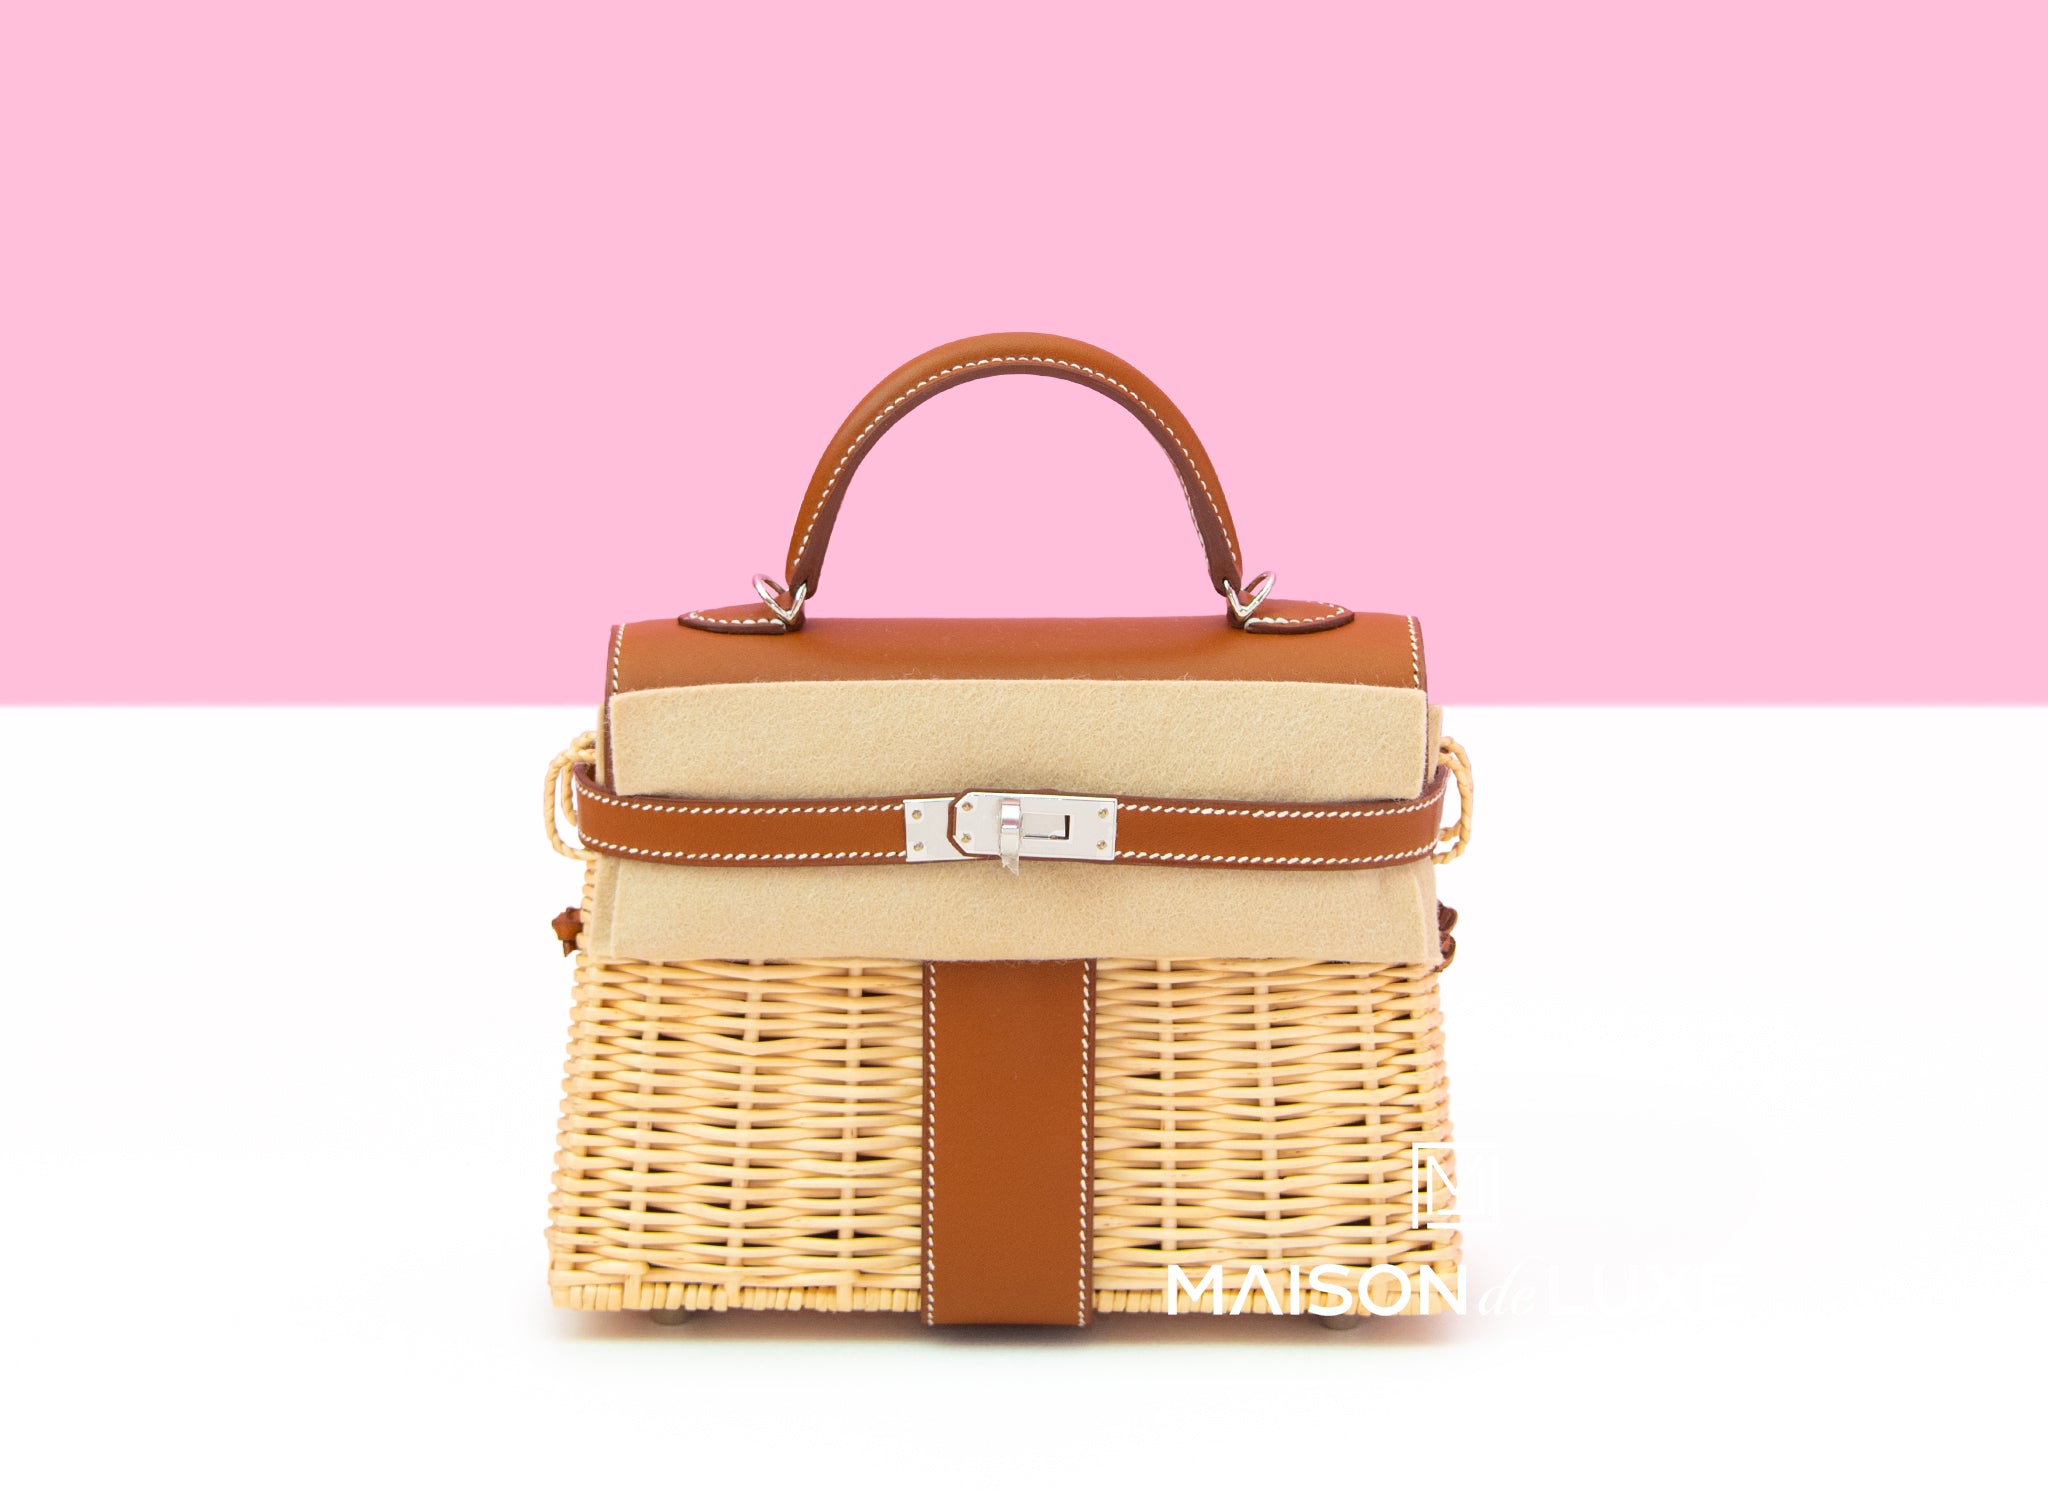 Where to buy the Hermes Kelly